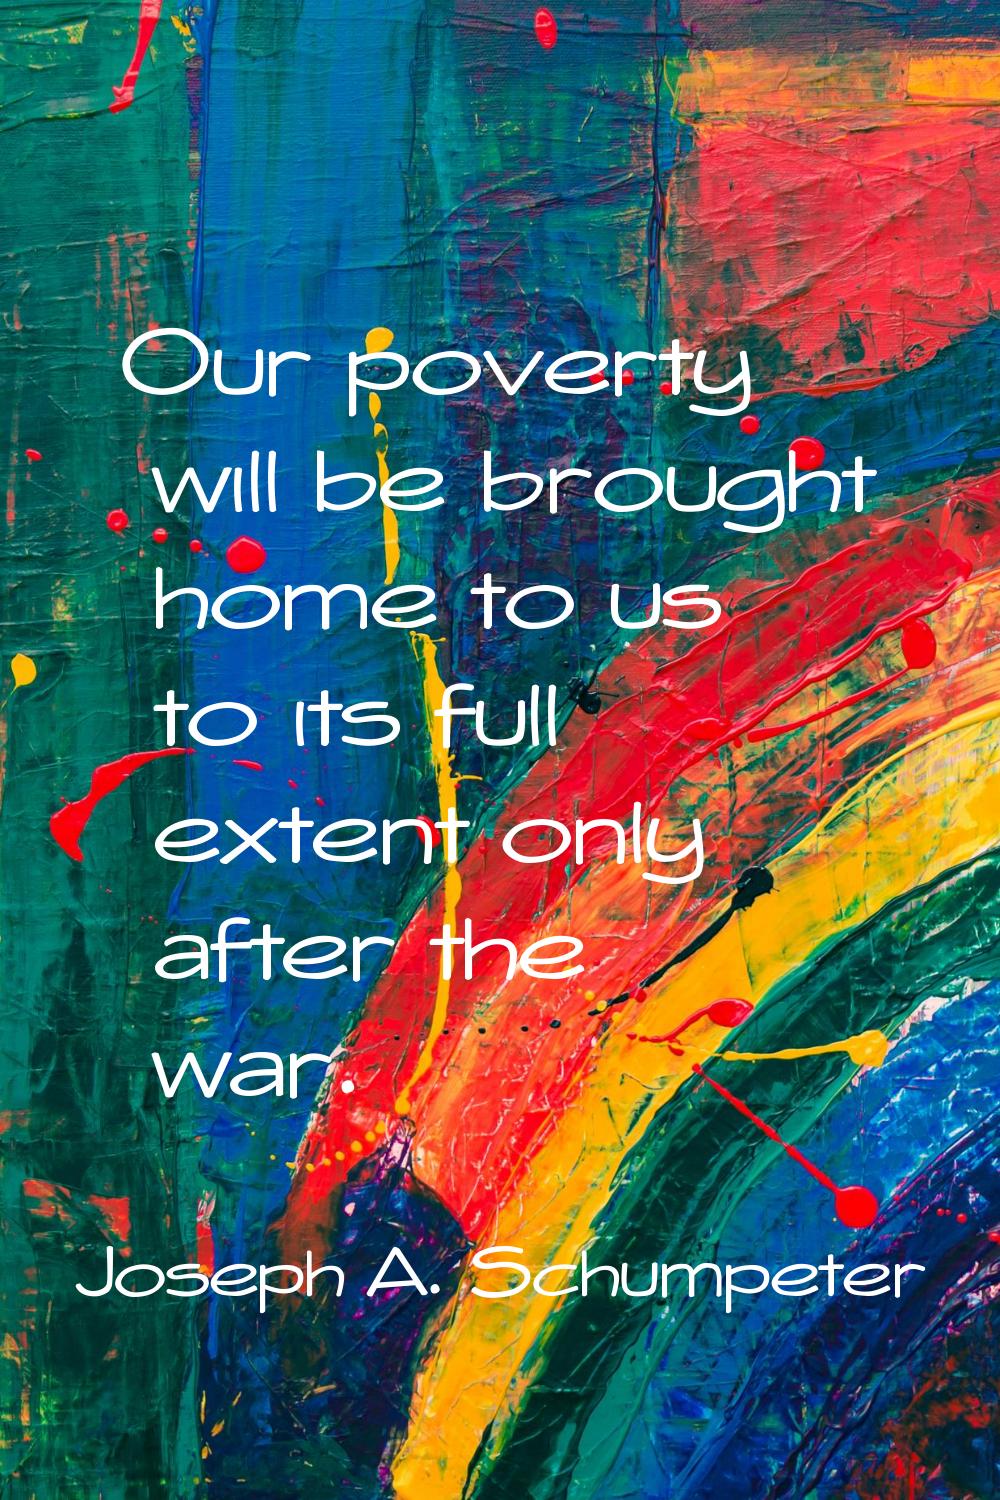 Our poverty will be brought home to us to its full extent only after the war.